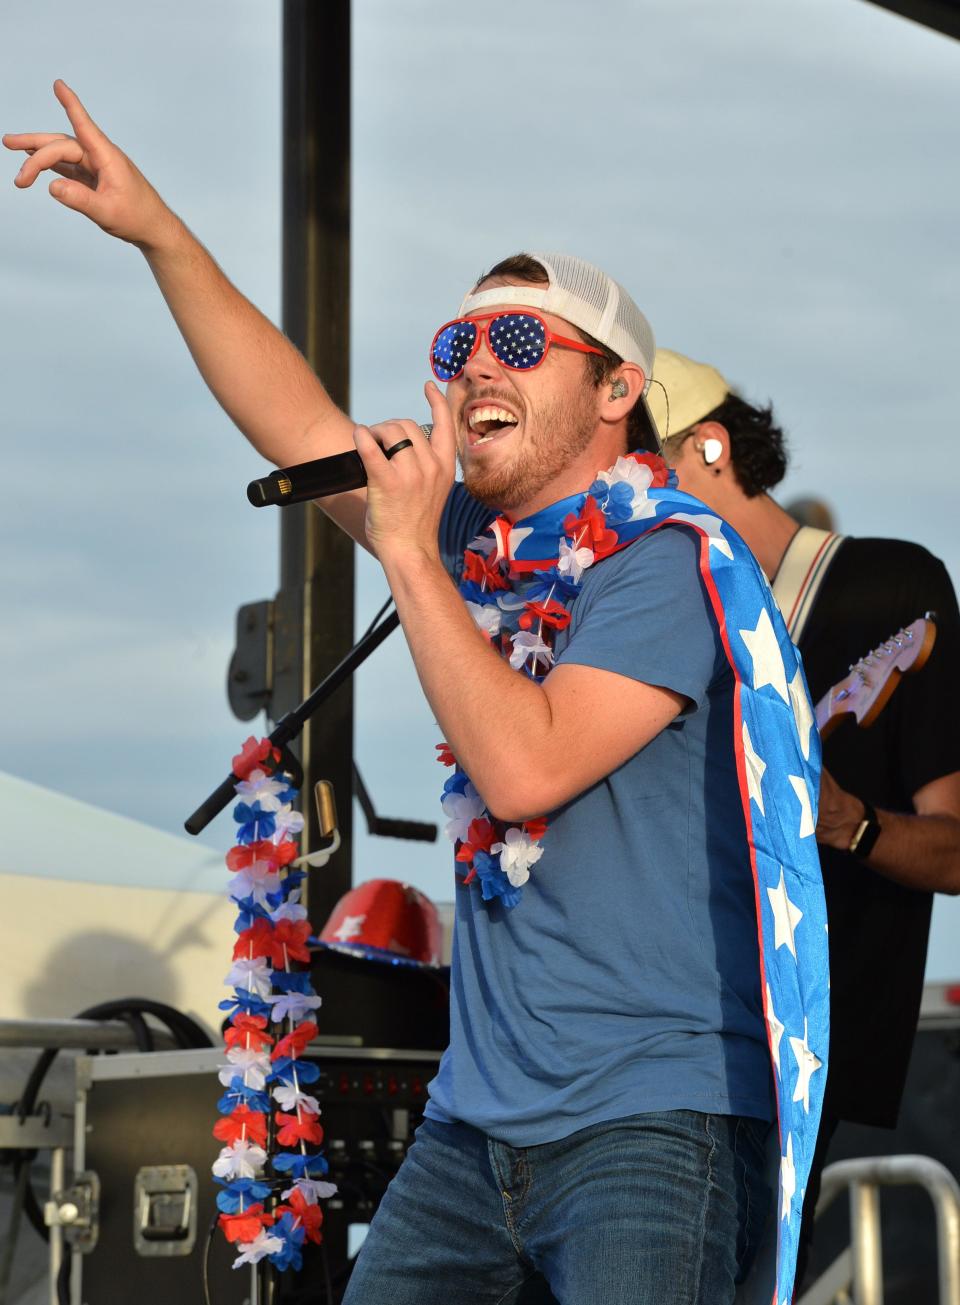 The Derek Lersch Band, seen here performing July 3, 2022 at the Nathan Benderson Park Fireworks on the Lake festival, is performing Sunday at the Bradenton Alive New Year's Eve Celebration.